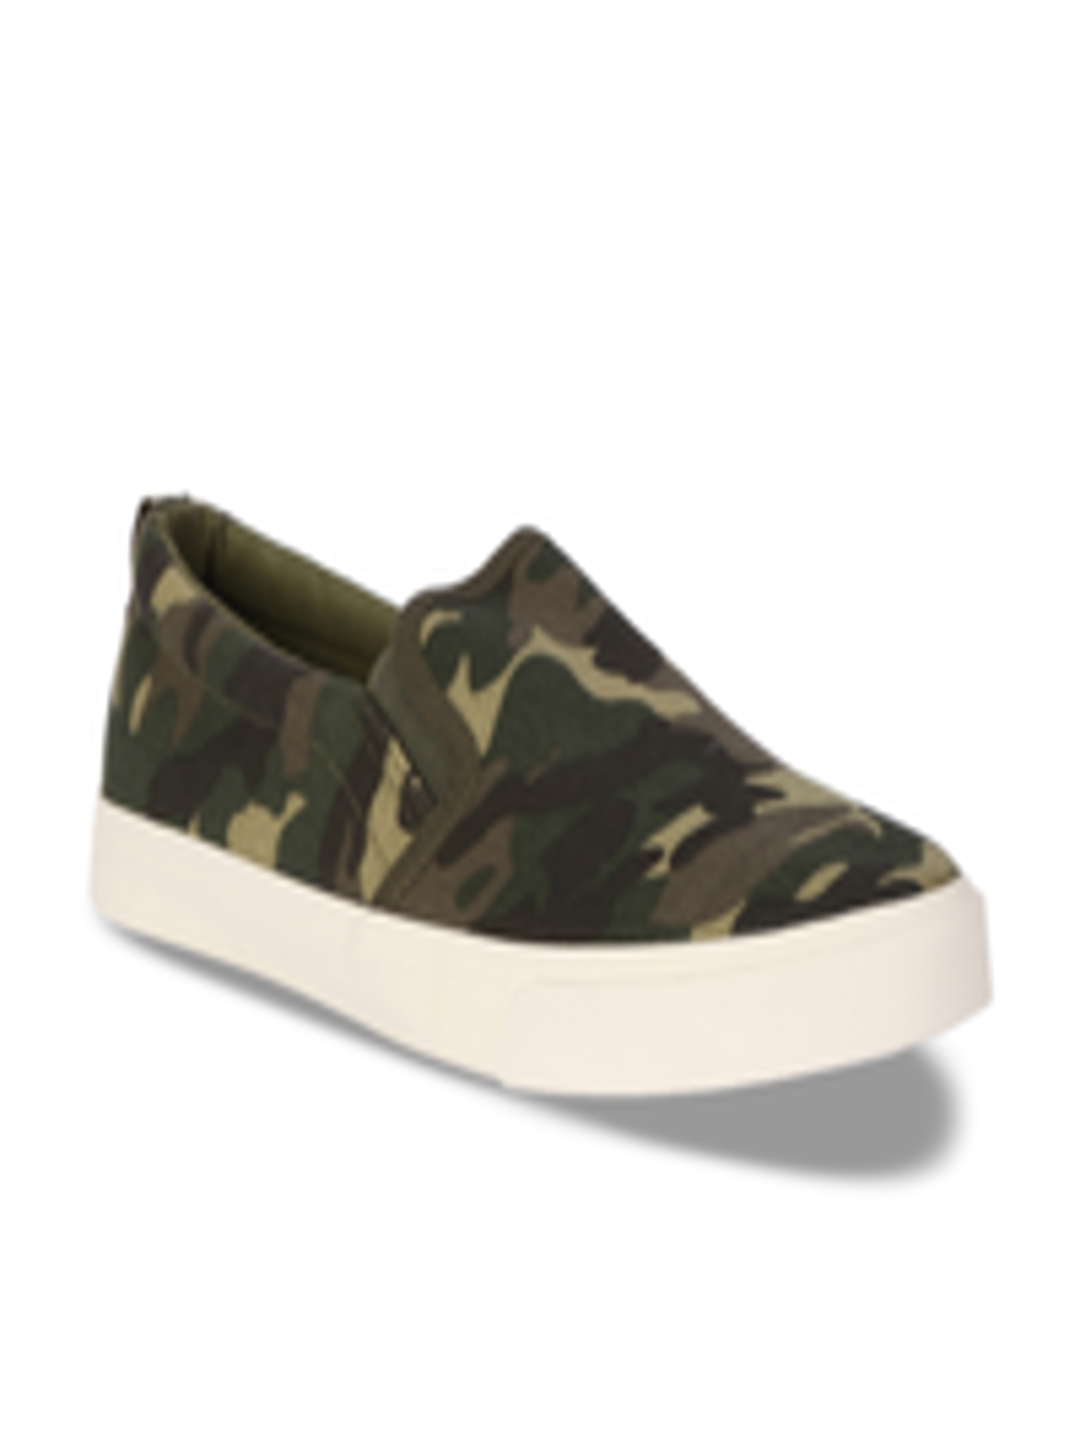 Buy People Men Olive Green Sneakers - Casual Shoes for Men 7999011 | Myntra